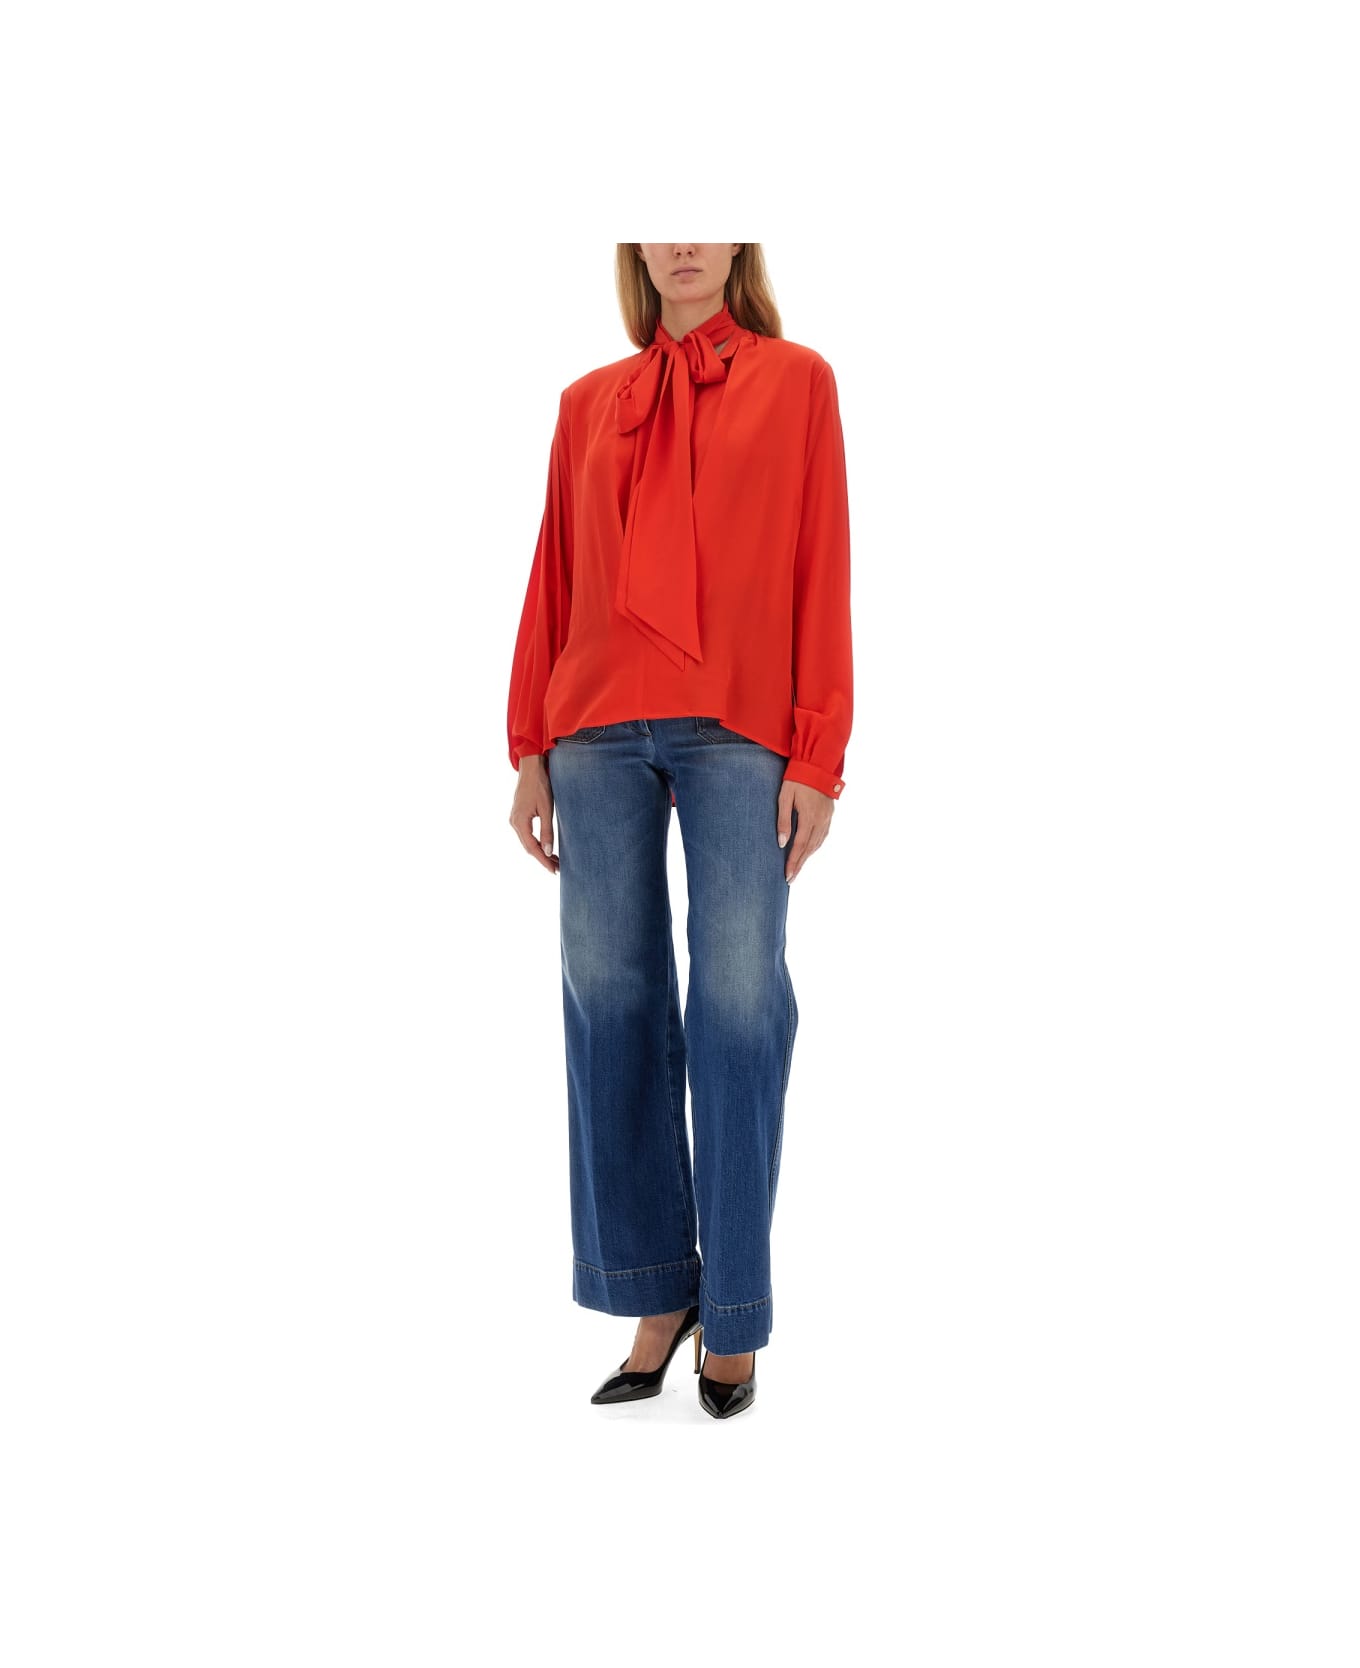 Victoria Beckham Blouse With Bow - RED